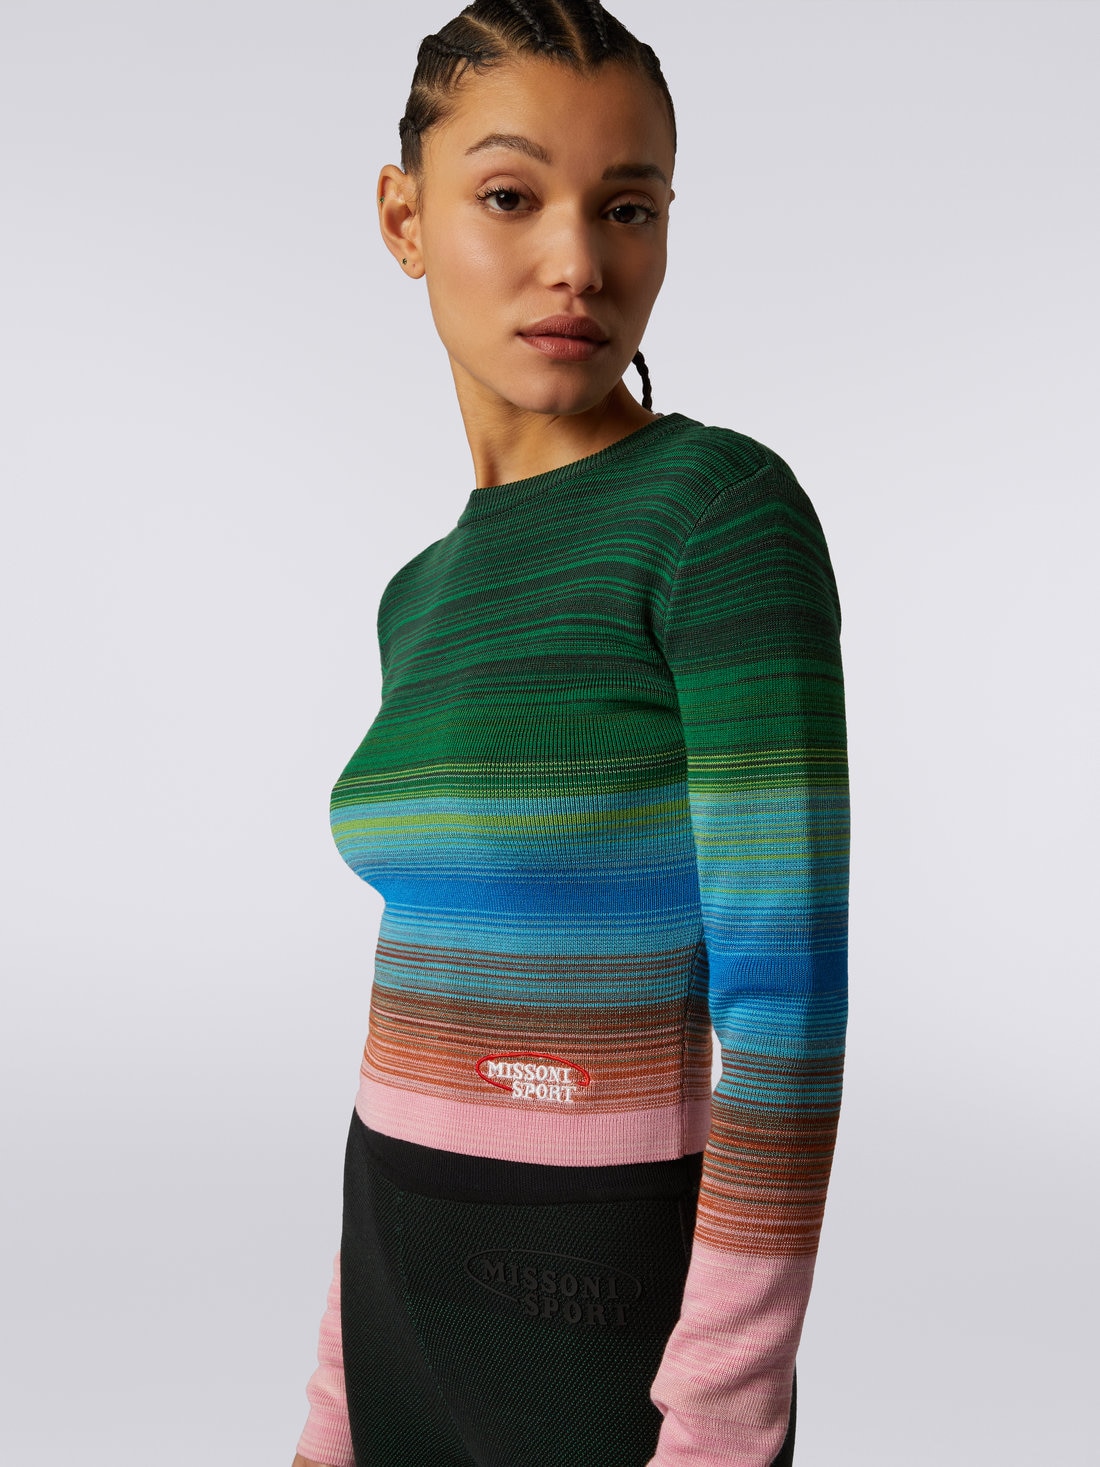 Long-sleeved crew-neck jumper in striped cotton and  viscose, Multicoloured  - SS23WN01BK027WSM91W - 4